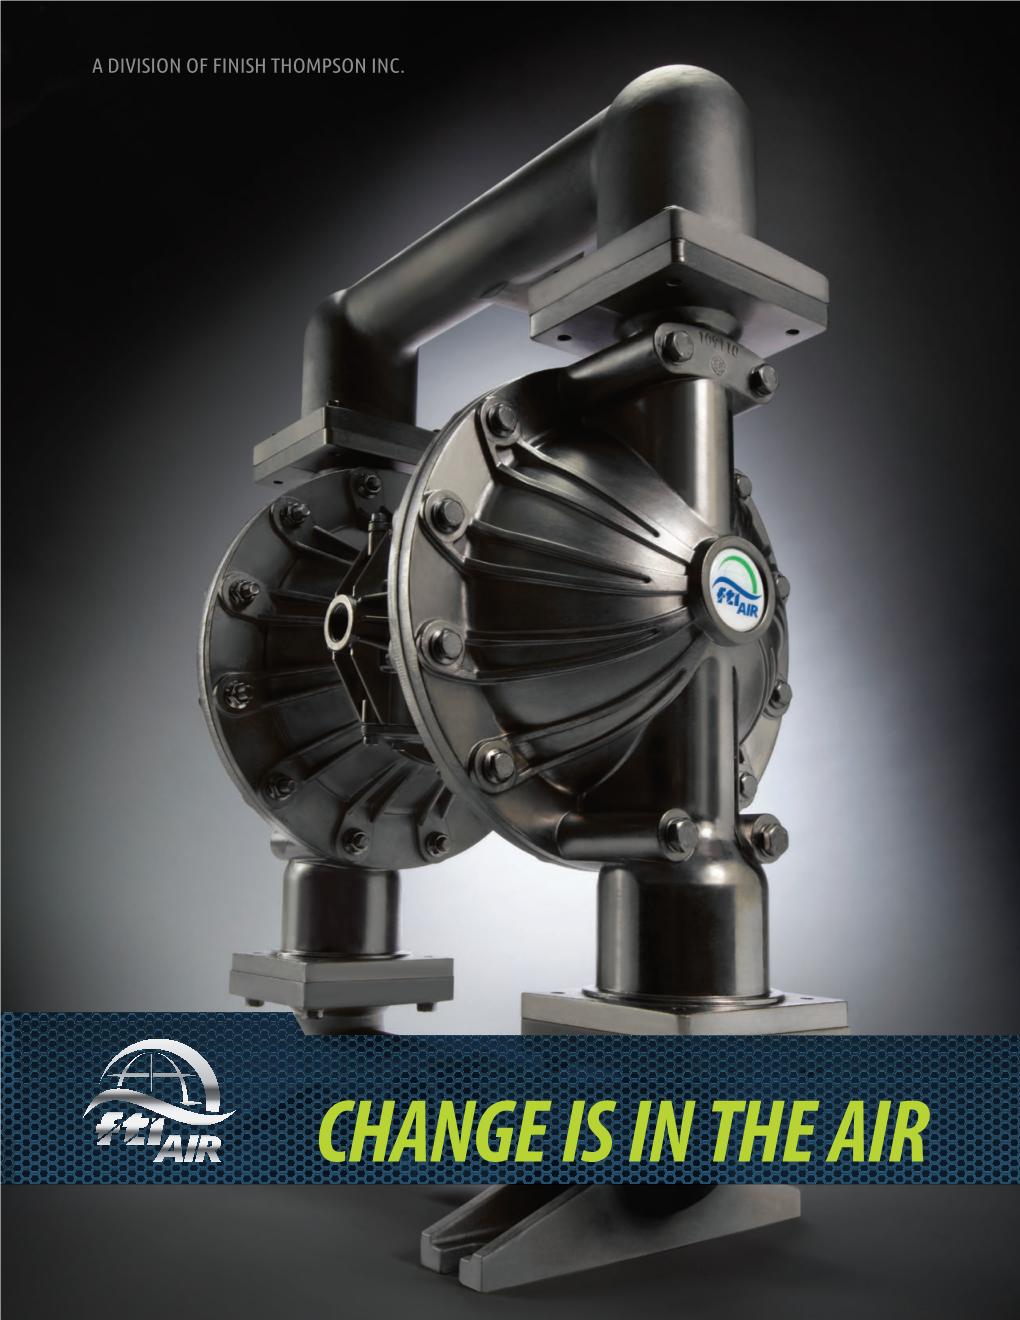 CHANGE IS in the AIR CHANGE IS in the AIR CHANGE IS in the AIR FTI AIR Is the Latest Invention from the Talents and Ambitions of Finish Thompson, Inc